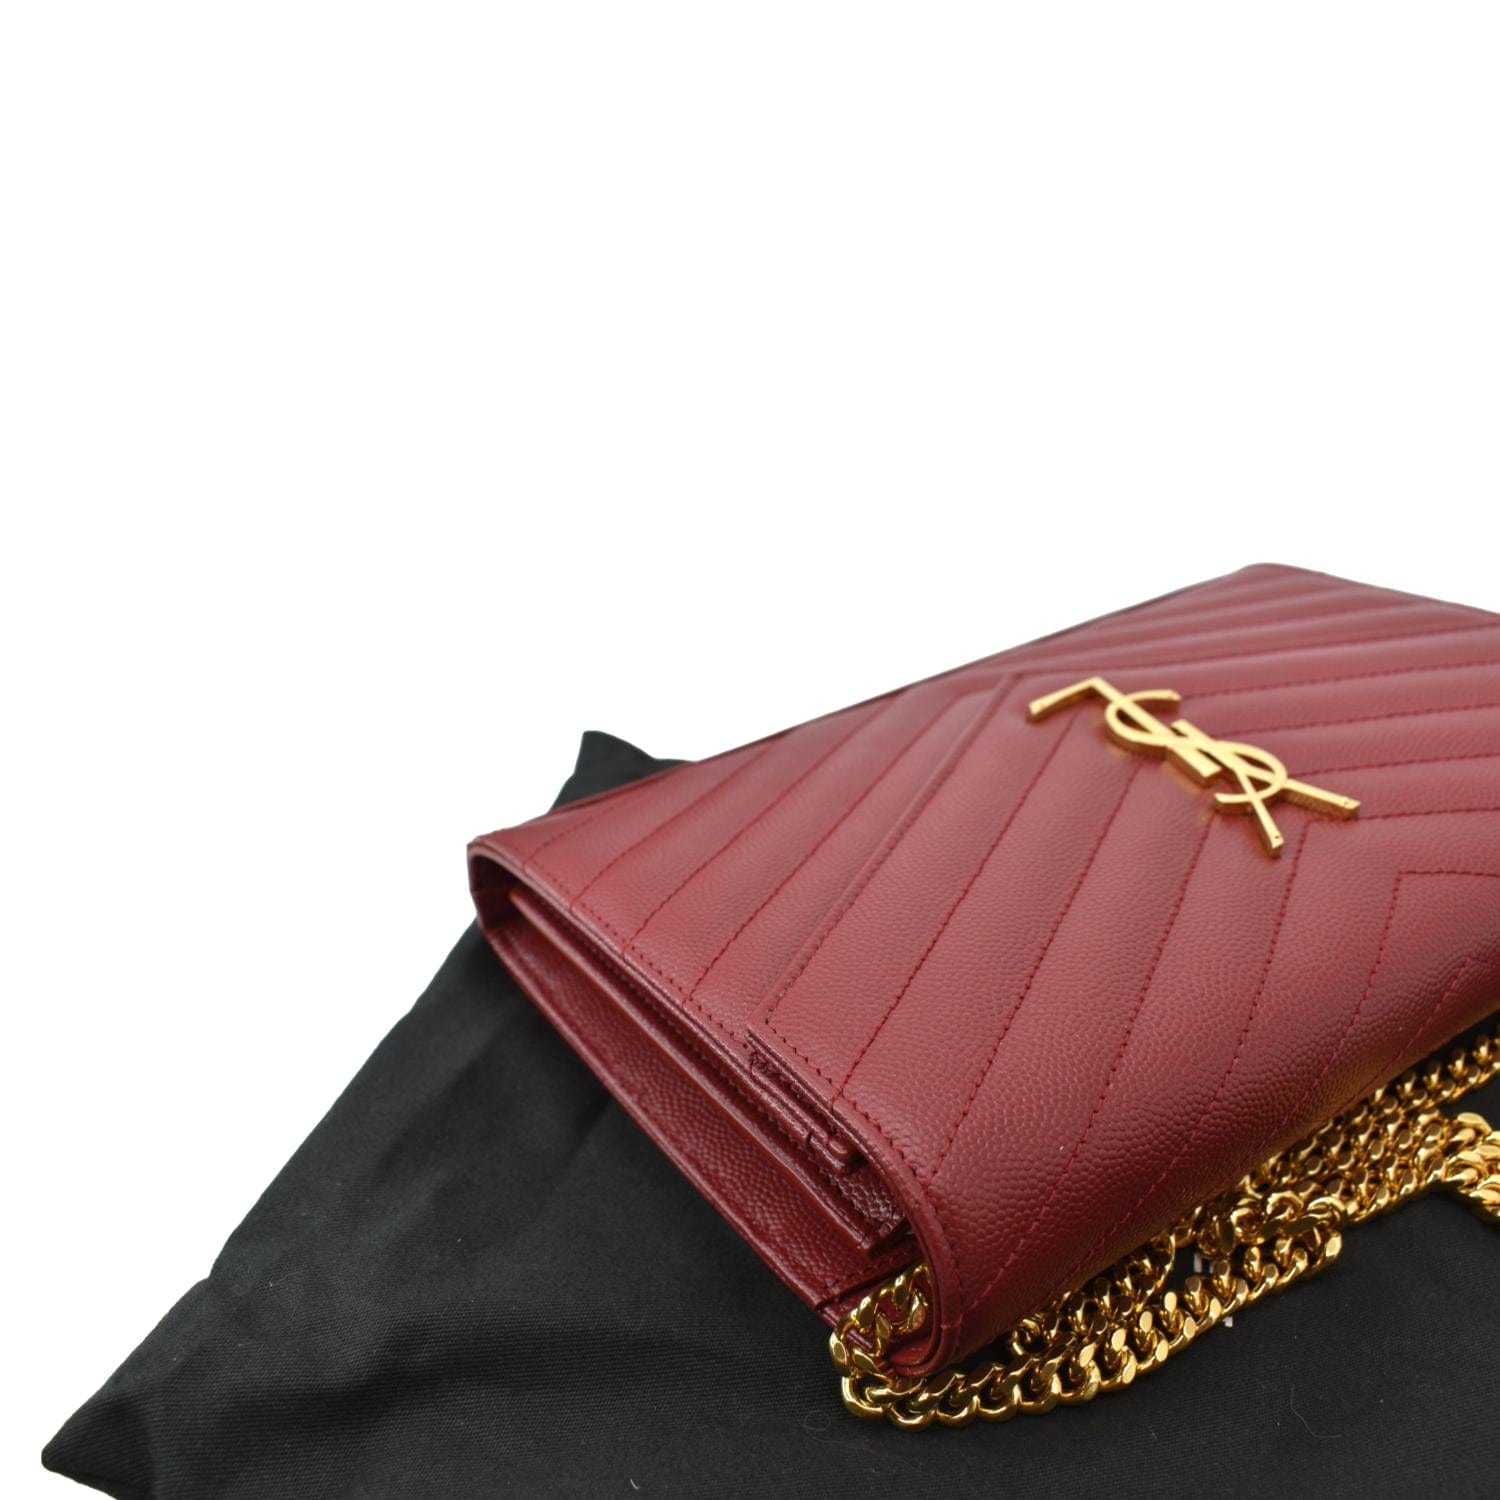 Saint Laurent Red Box Leather Coin Purse